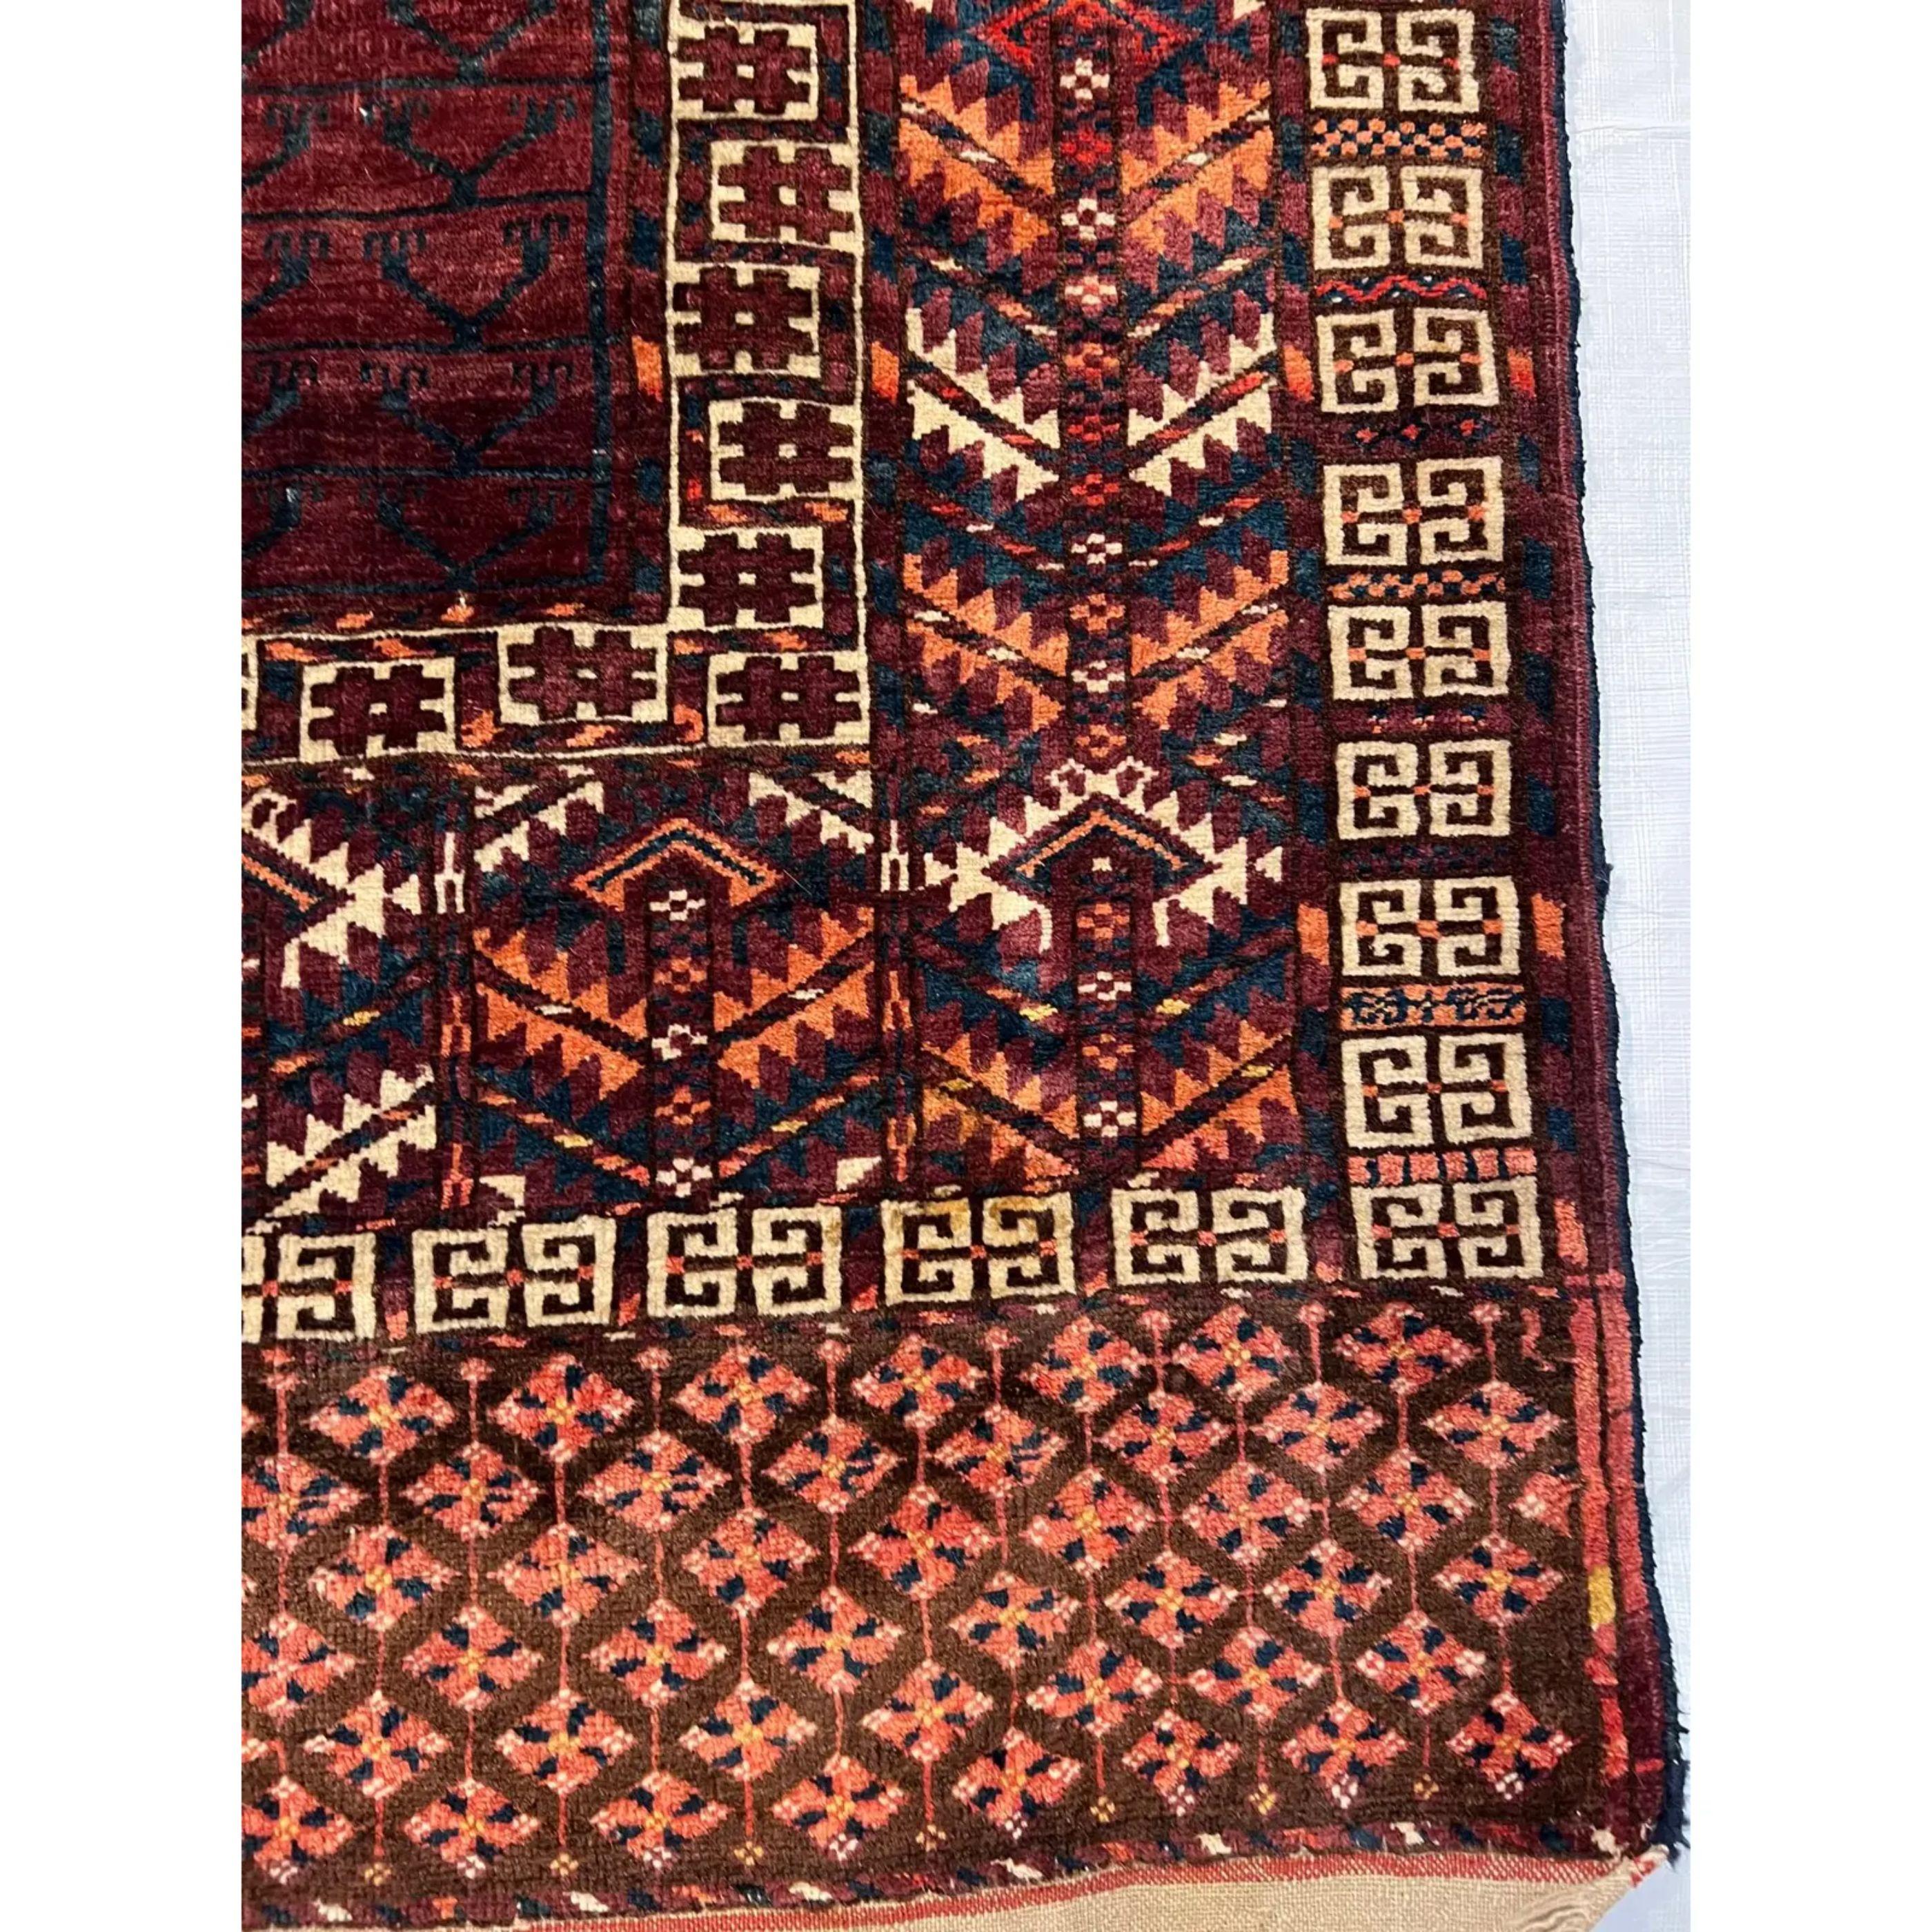 1900s Antique Turkeman Rug, handmade and hand-knotted